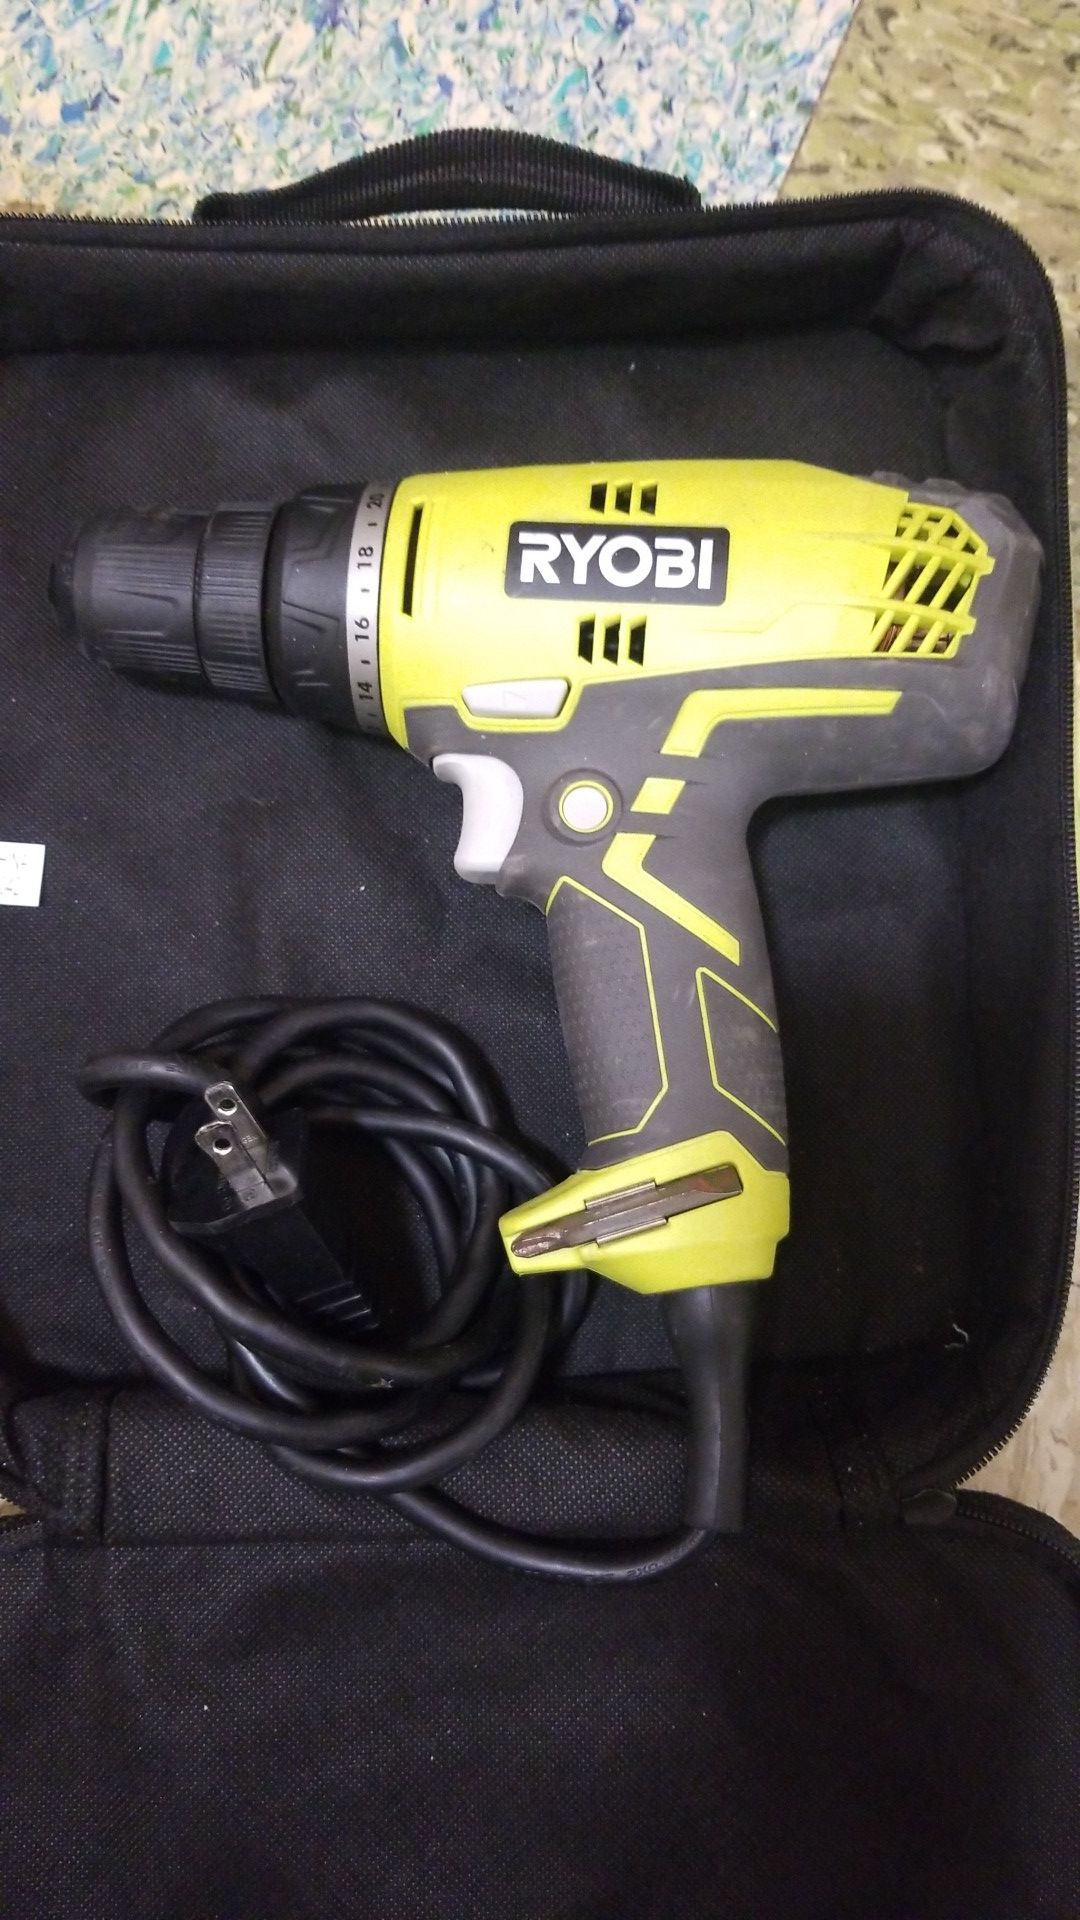 Ryobi 5.5-Amp 3/8 in. Variable Speed Reversible Compact Clutch Driver